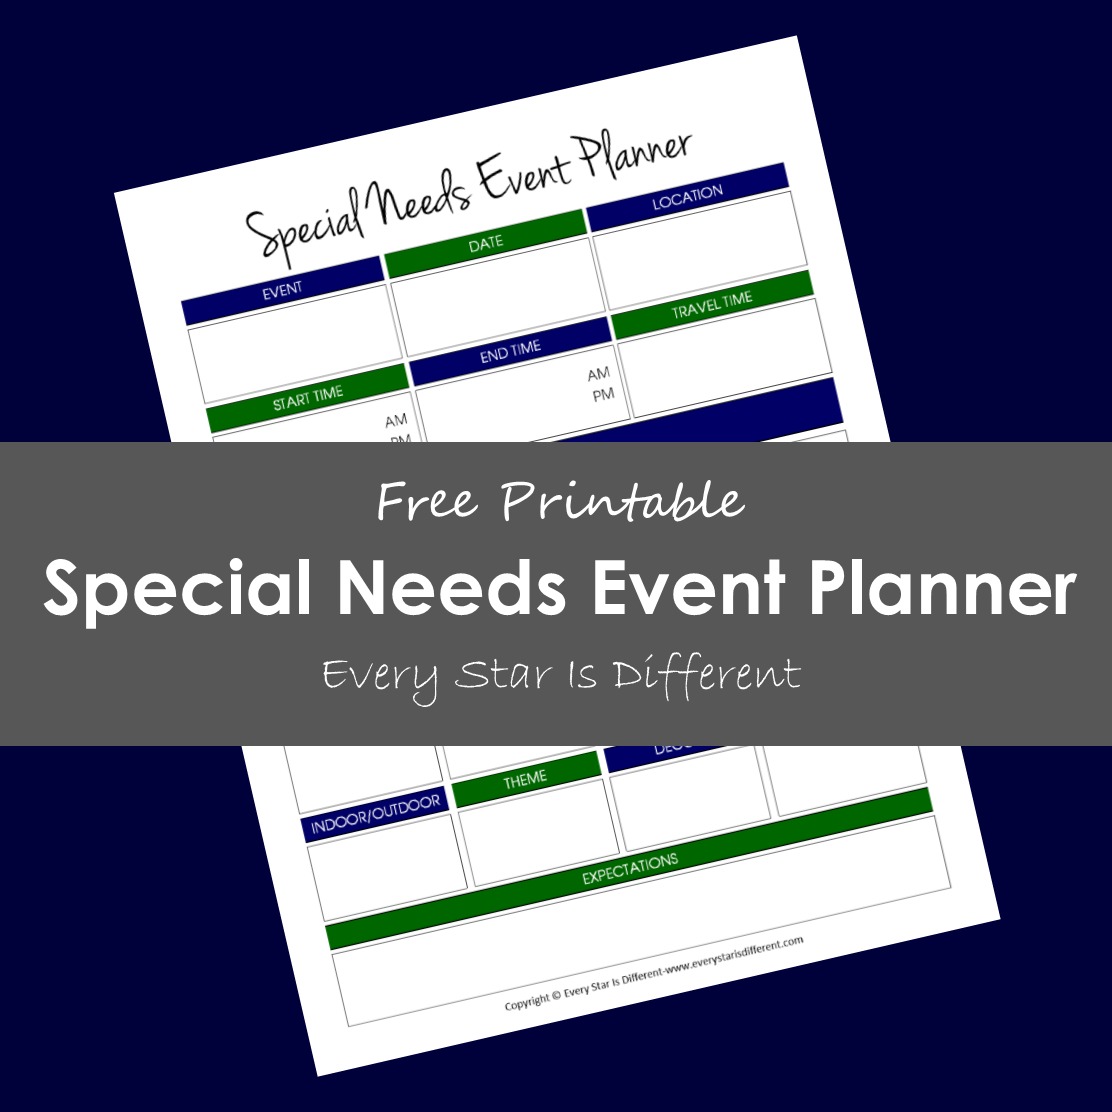 Special Needs Event Planner